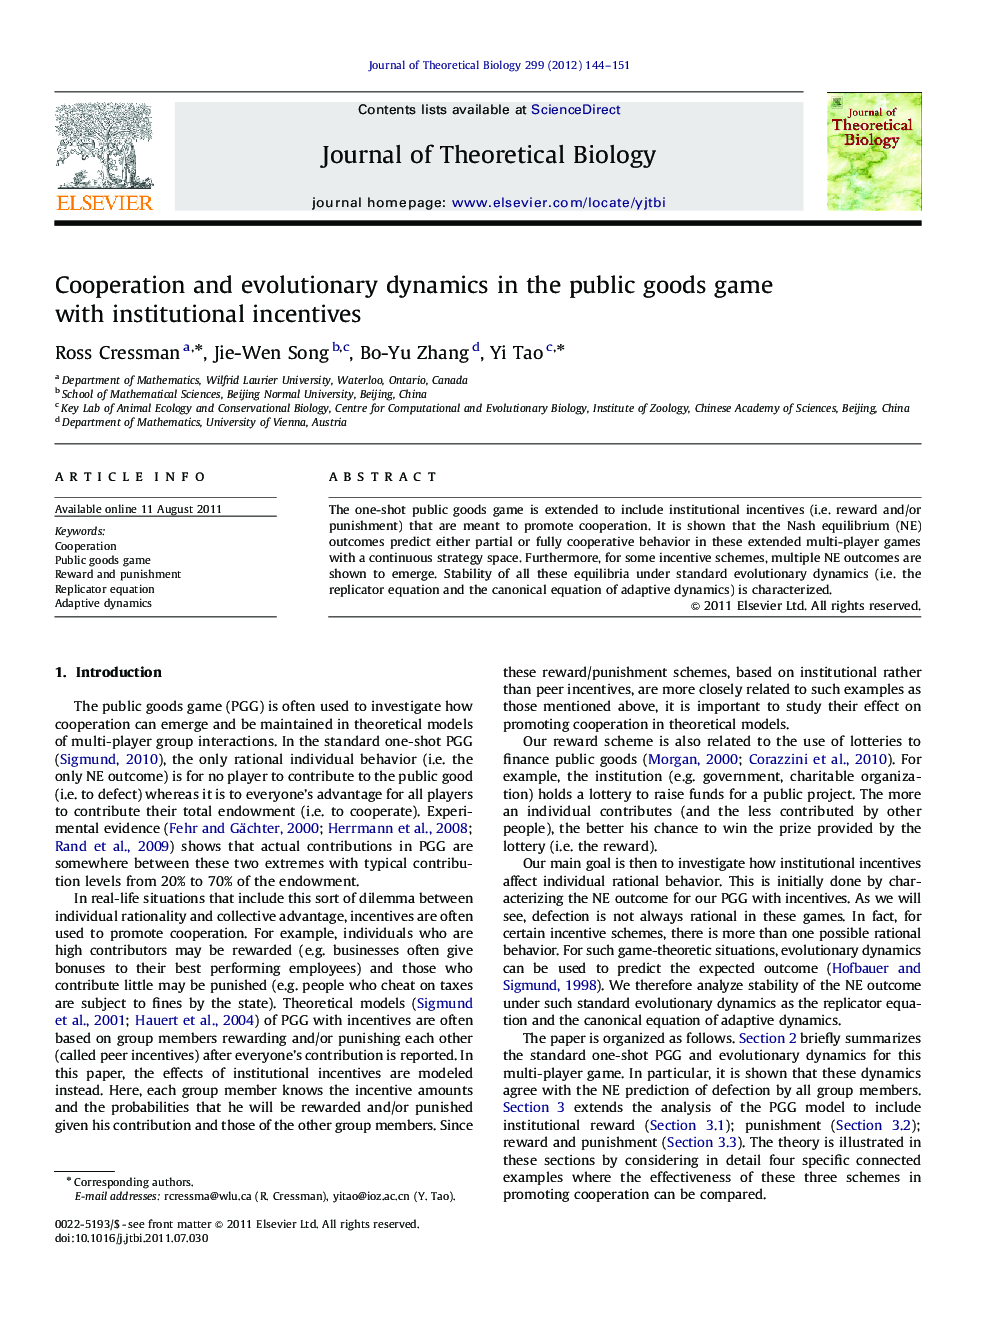 Cooperation and evolutionary dynamics in the public goods game with institutional incentives